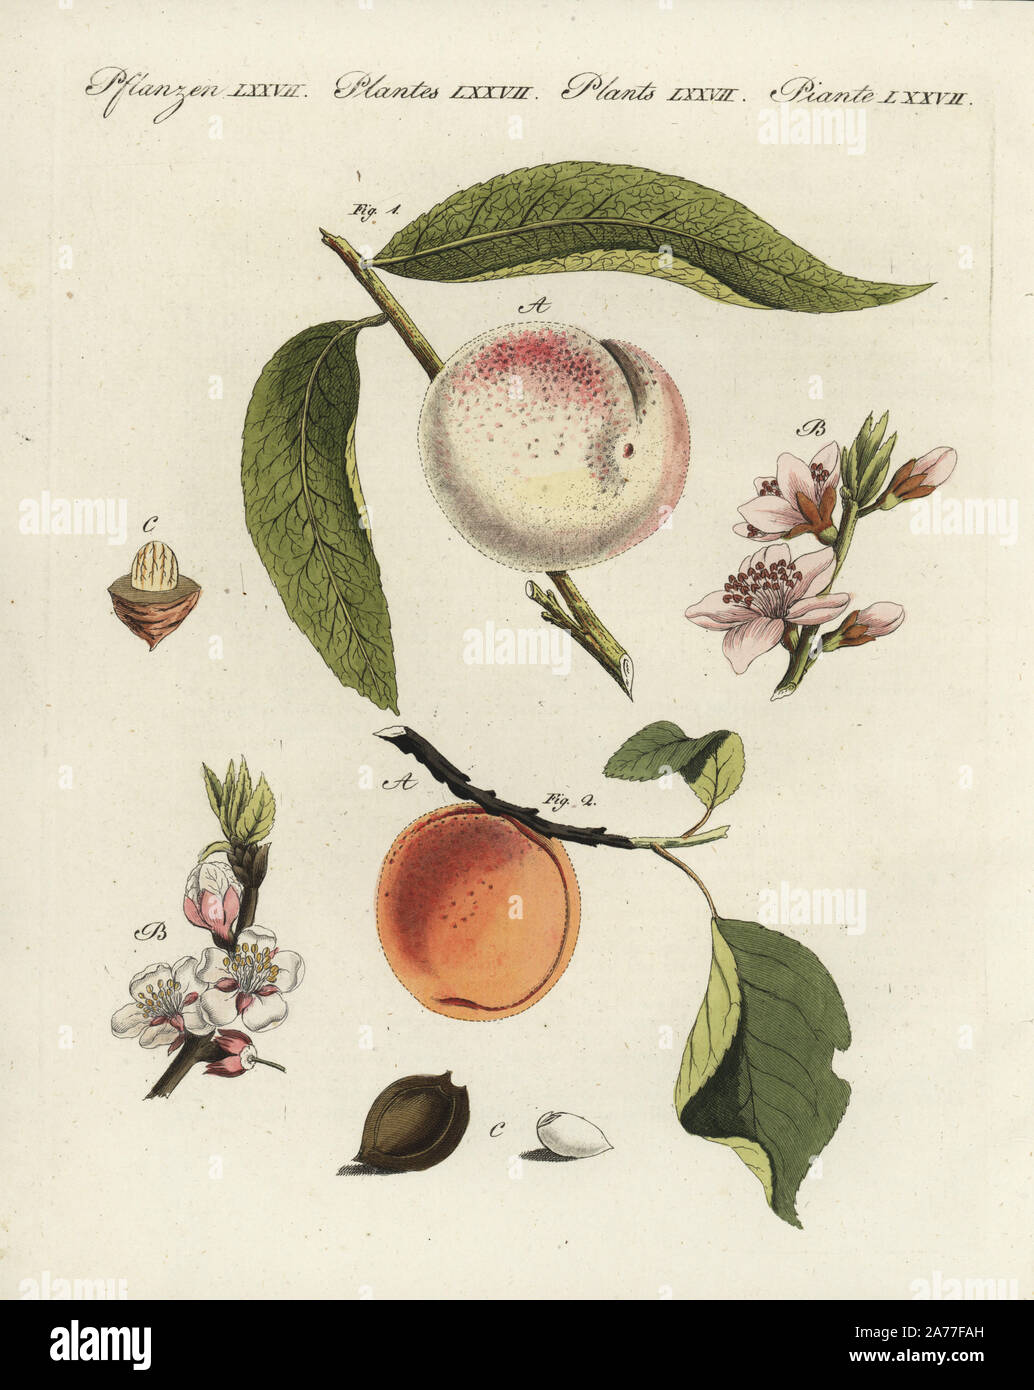 Peach tree, Prunus persica 1, and apricot, Prunus armeniaca 2, with fruit, blossom, leaf and stone. Handcoloured copperplate engraving from Friedrich Johann Bertuch's Bilderbuch fur Kinder (Picture Book for Children), Weimar, 1798. Stock Photo